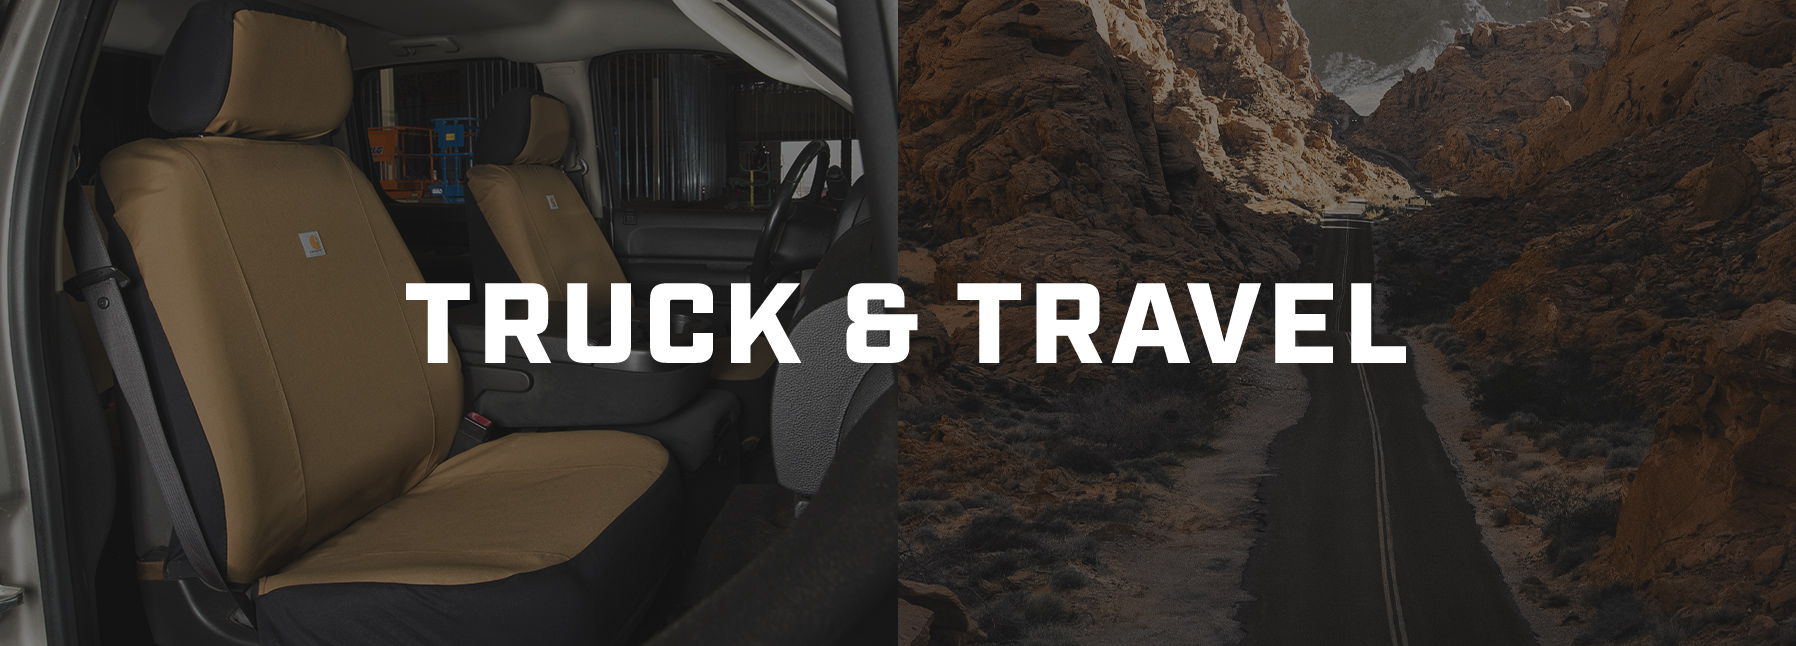 Truck and Travel Gear